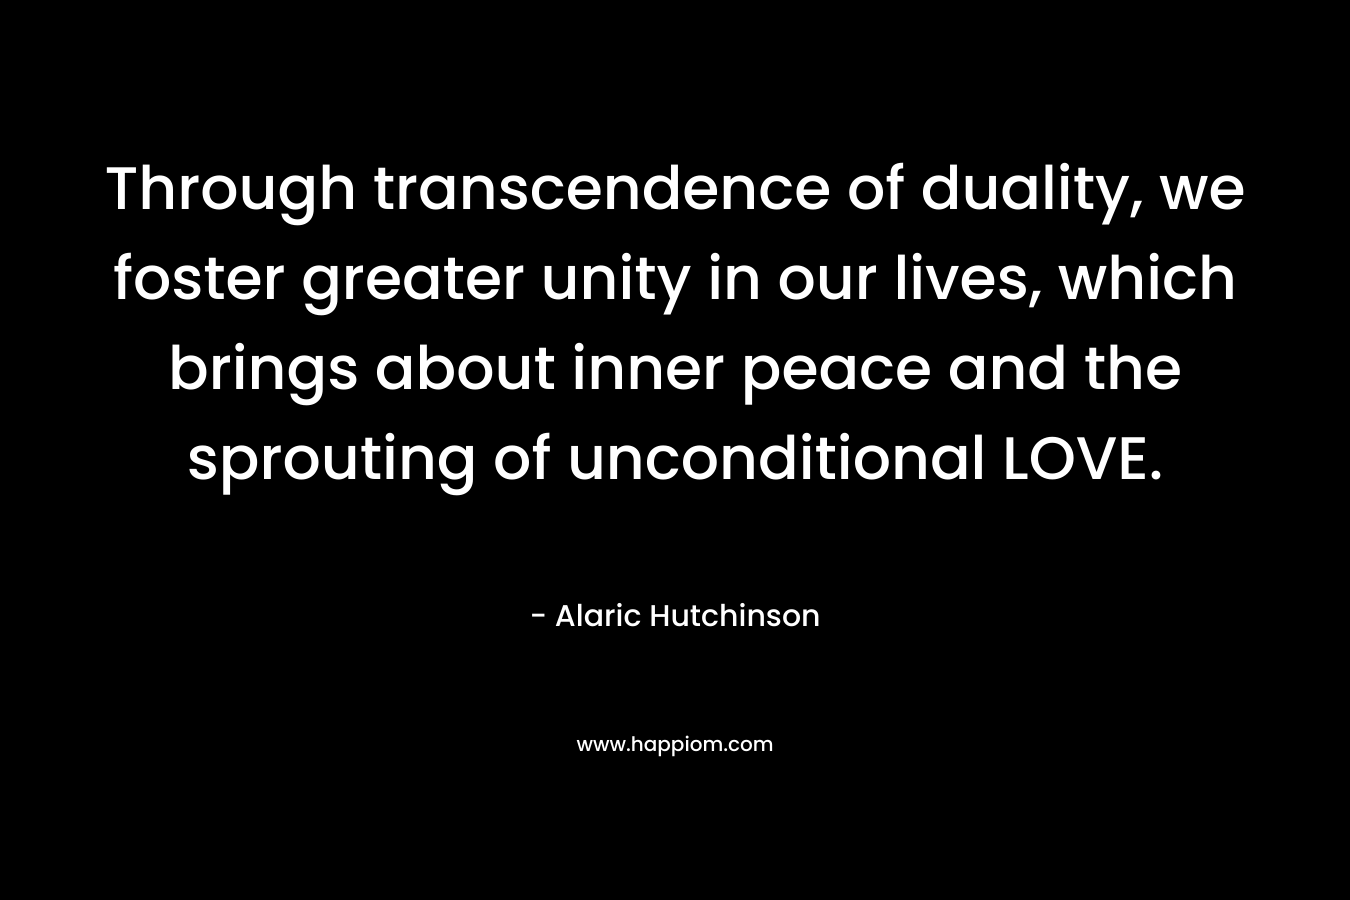 Through transcendence of duality, we foster greater unity in our lives, which brings about inner peace and the sprouting of unconditional LOVE. – Alaric Hutchinson